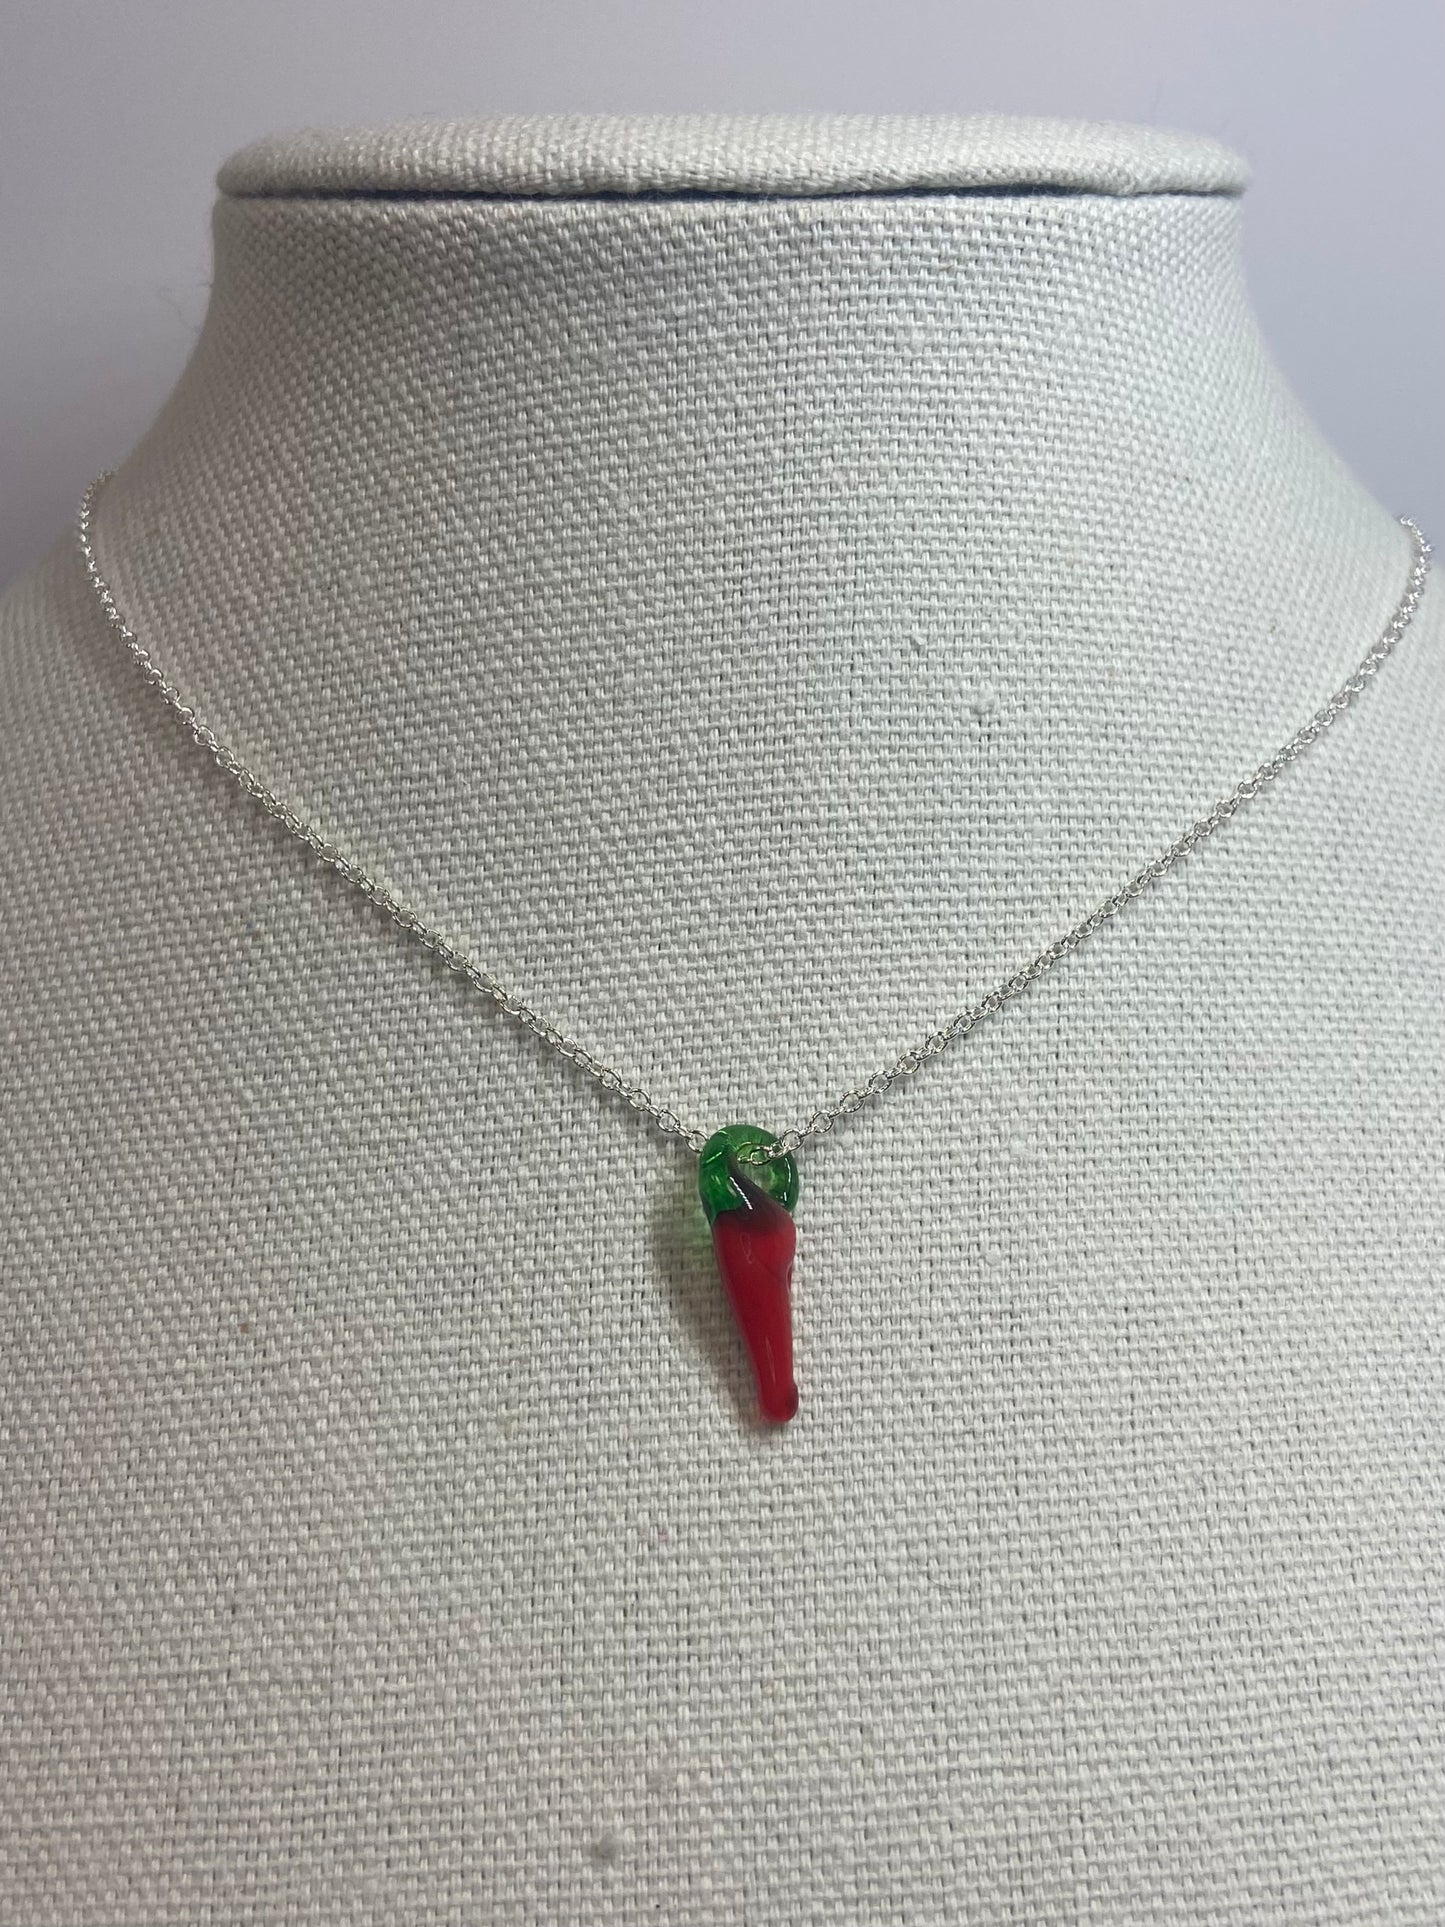 Necklace red pepper